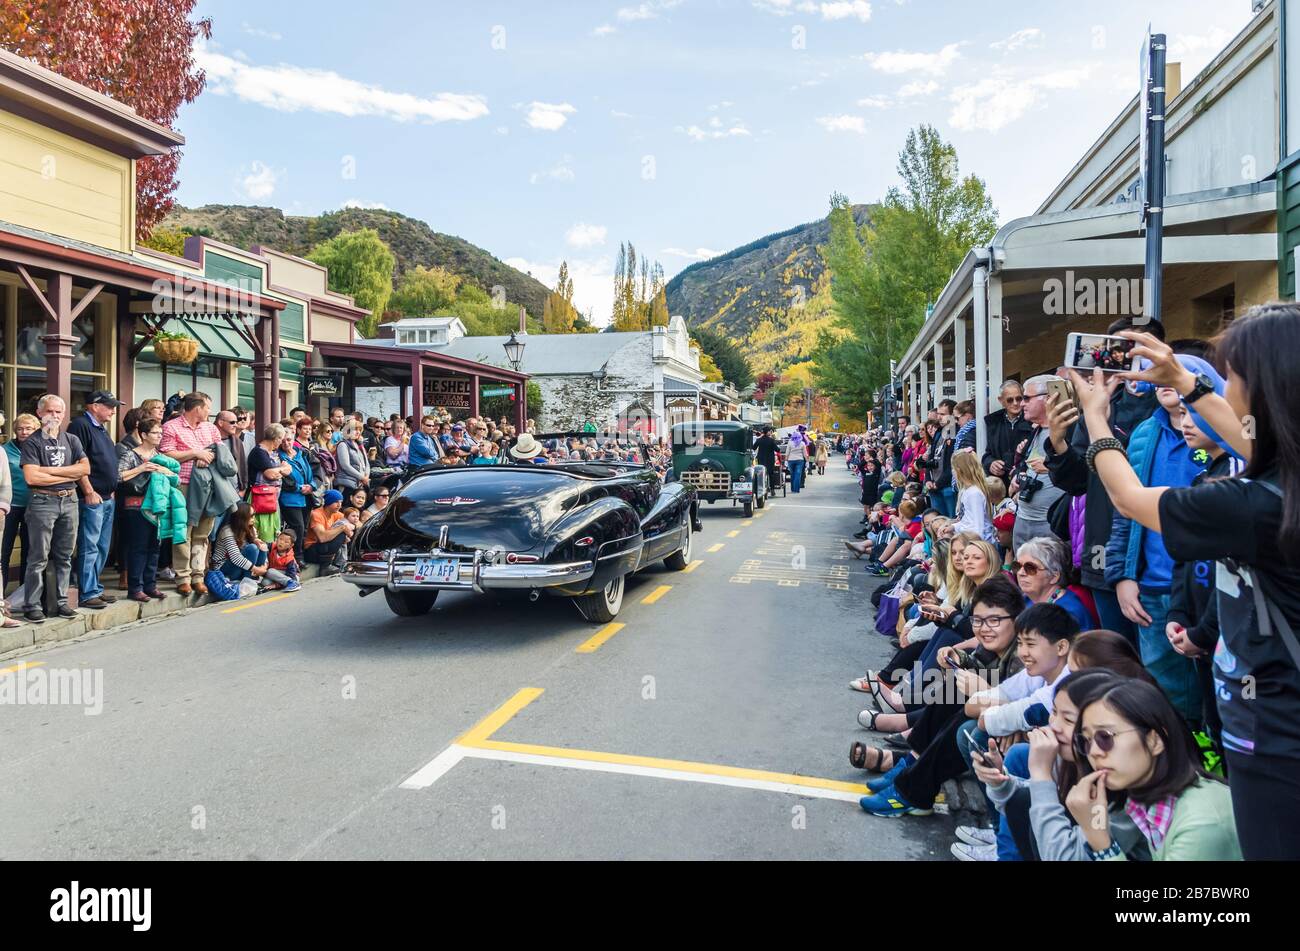 Arrowtown, New Zealand - April 23,2016 : There is parade event during the Arrowtown Autumn Festival on Buckingham Street. Stock Photo